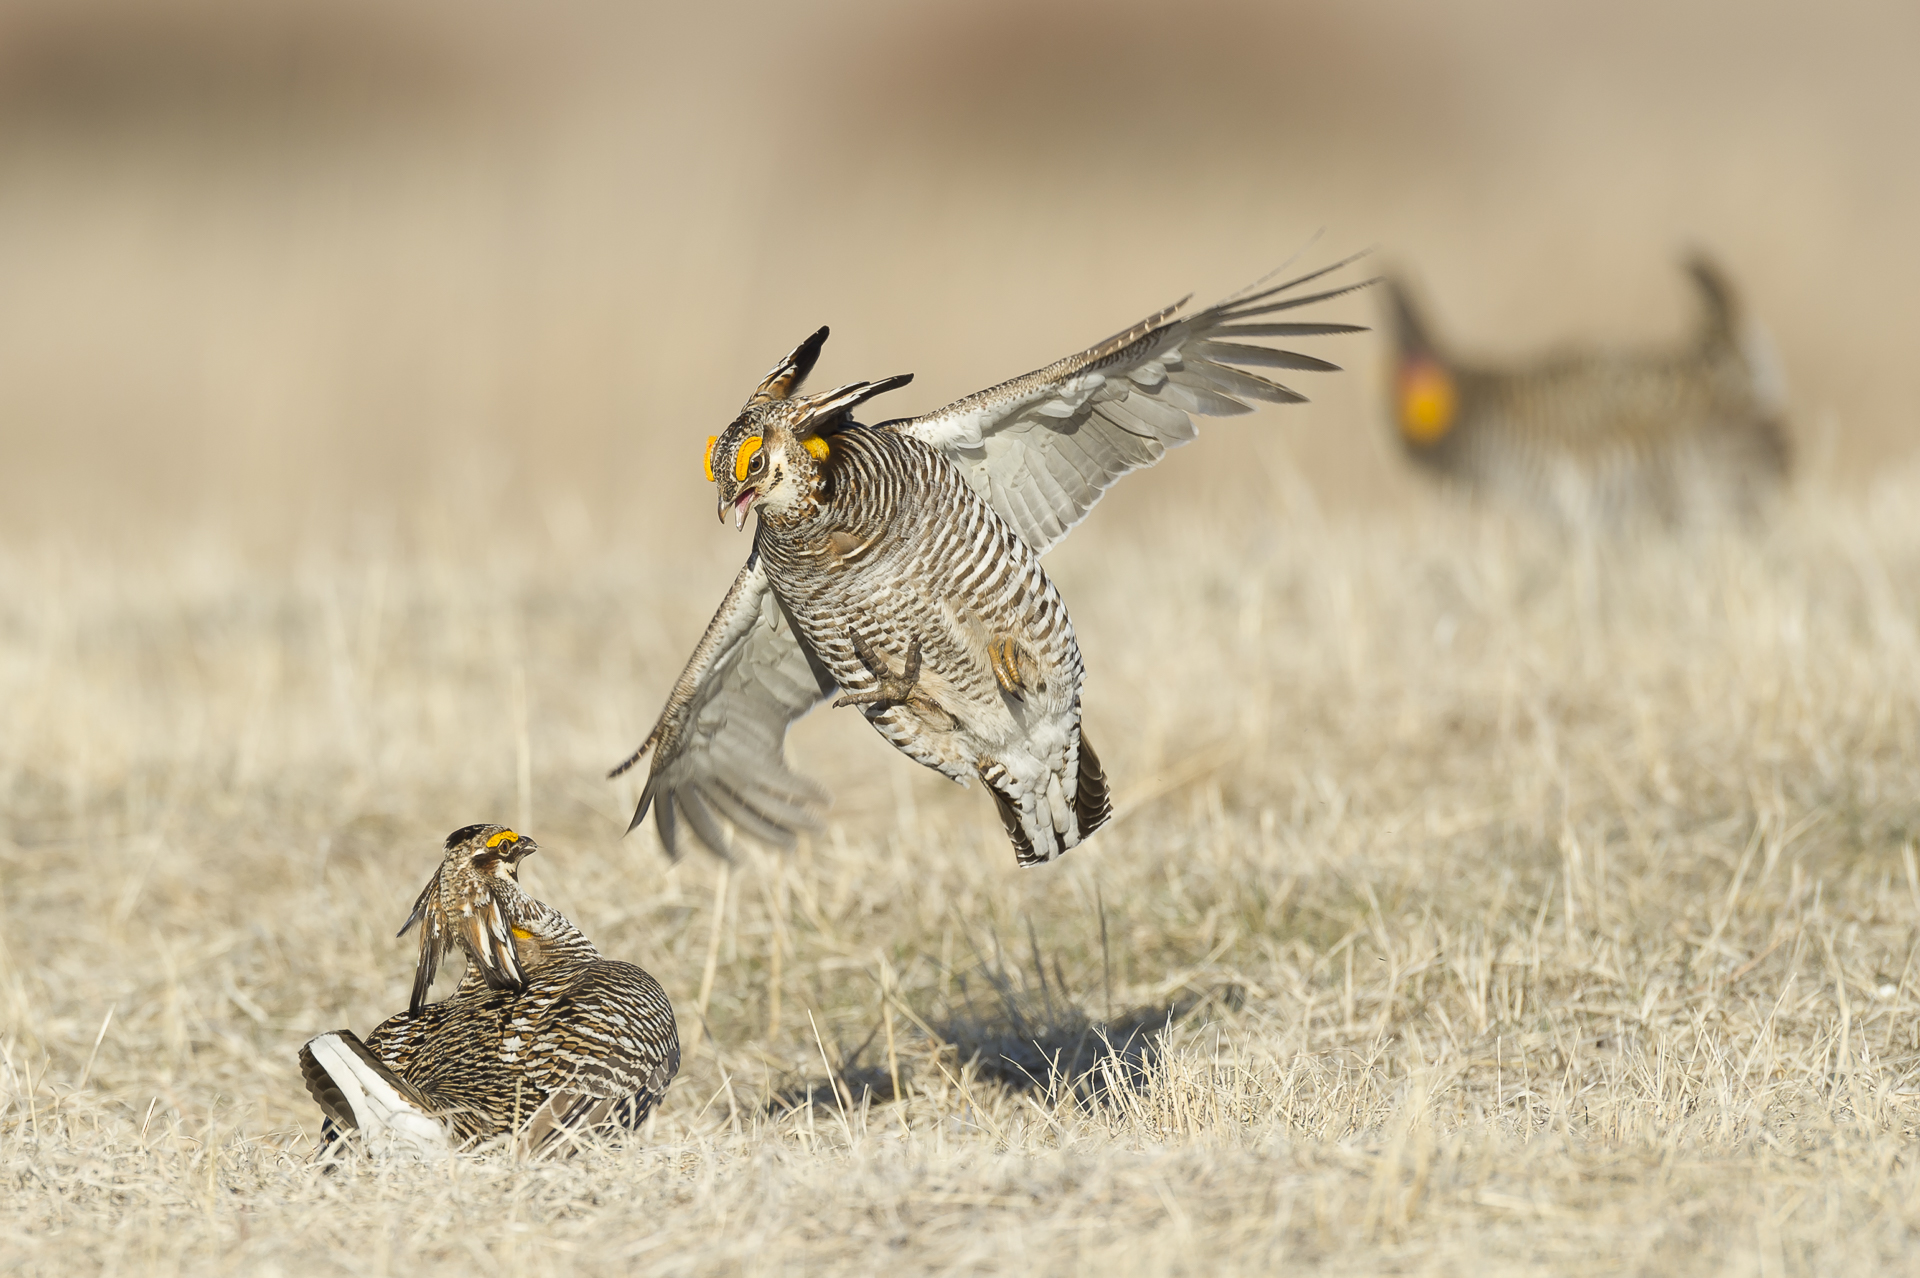 Cock fight: greater prairie chickens